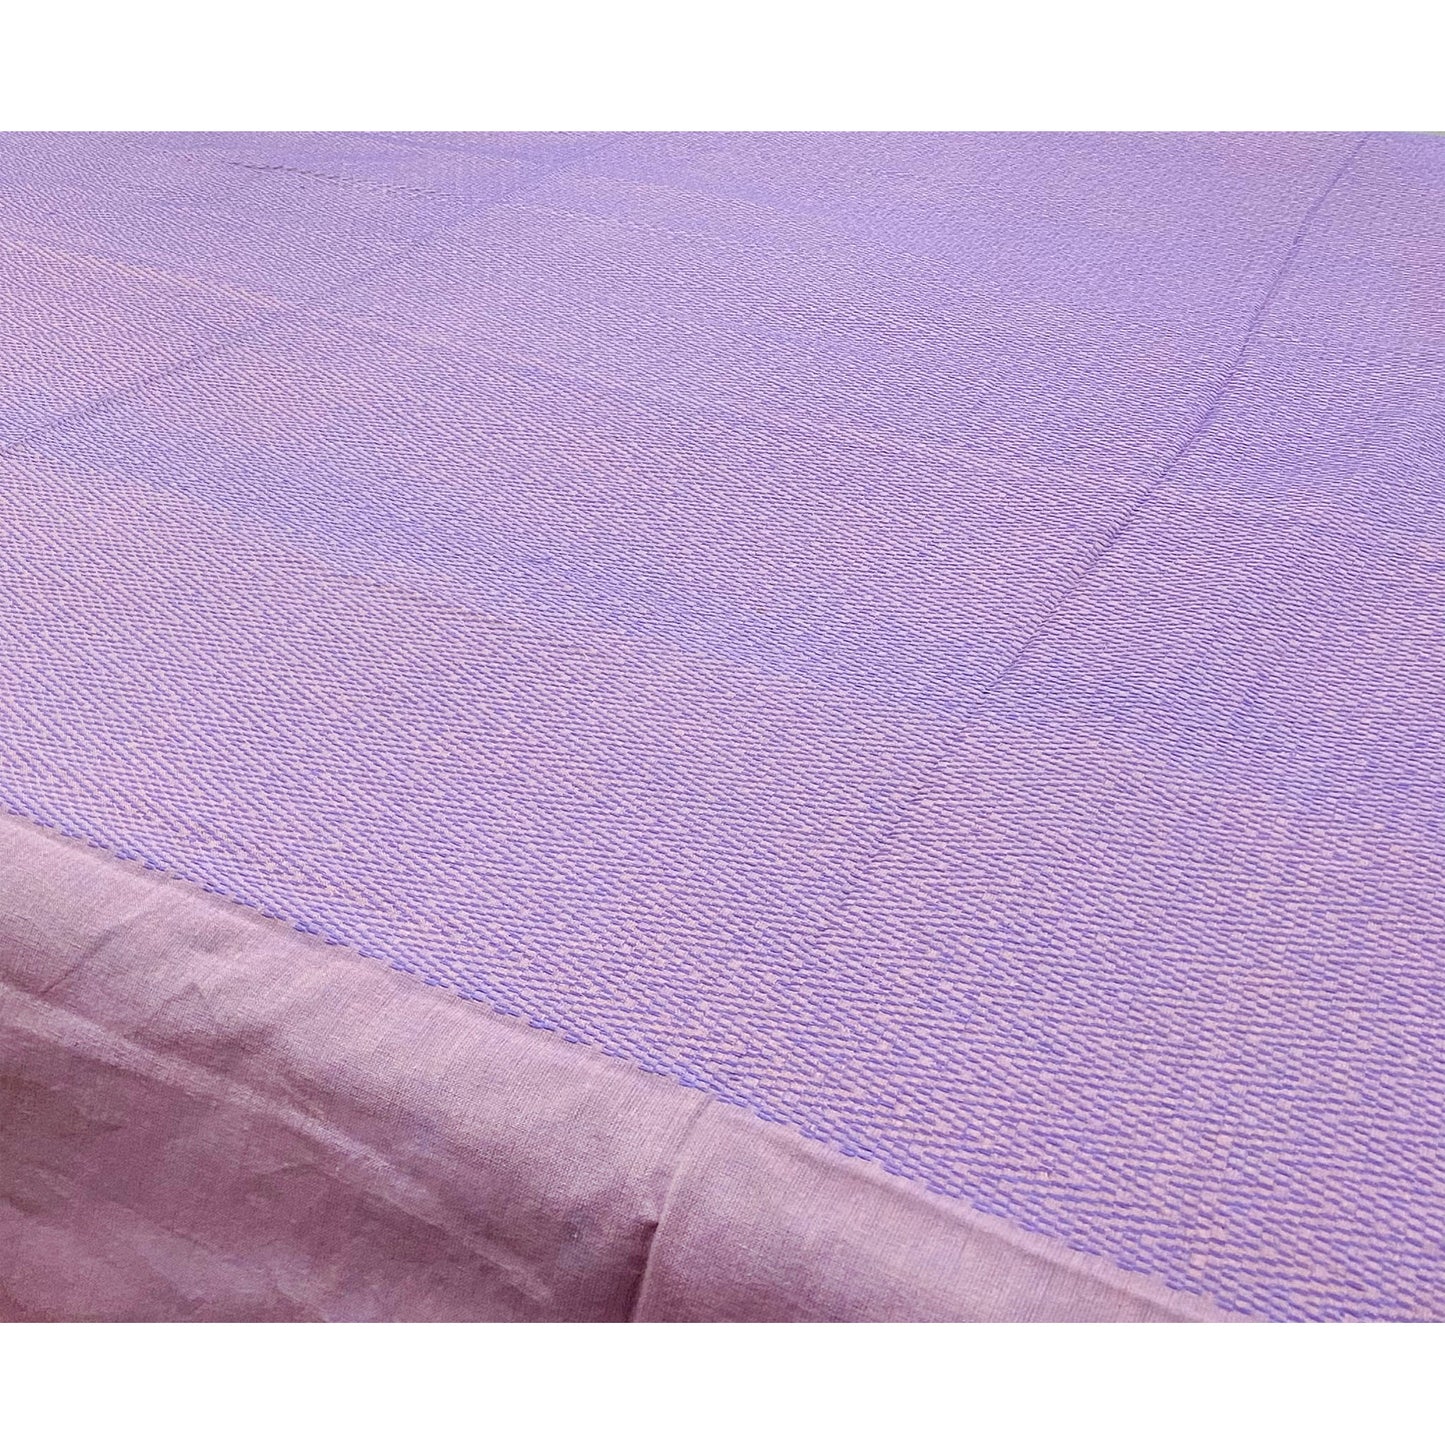 Reversible Mauve & Rust Woven Bed Cover